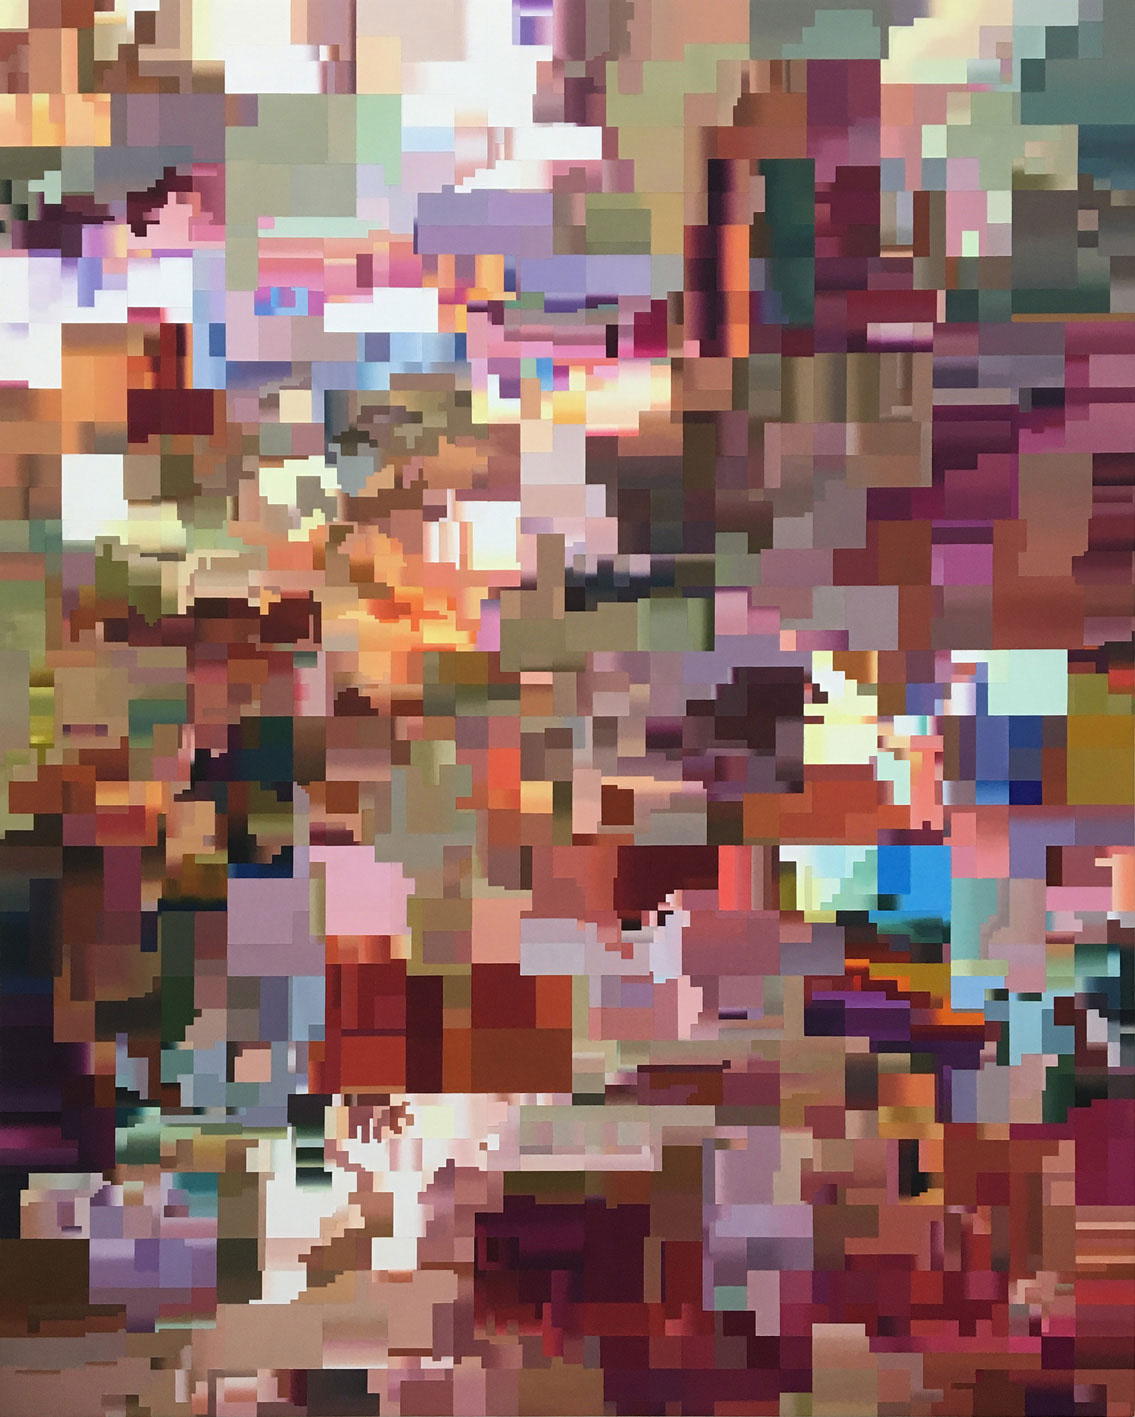 Oil painting by artist and painter Paul Lemmon in strong colours of olive, brown and wine depicting a pixelated frame from a glitched digital video